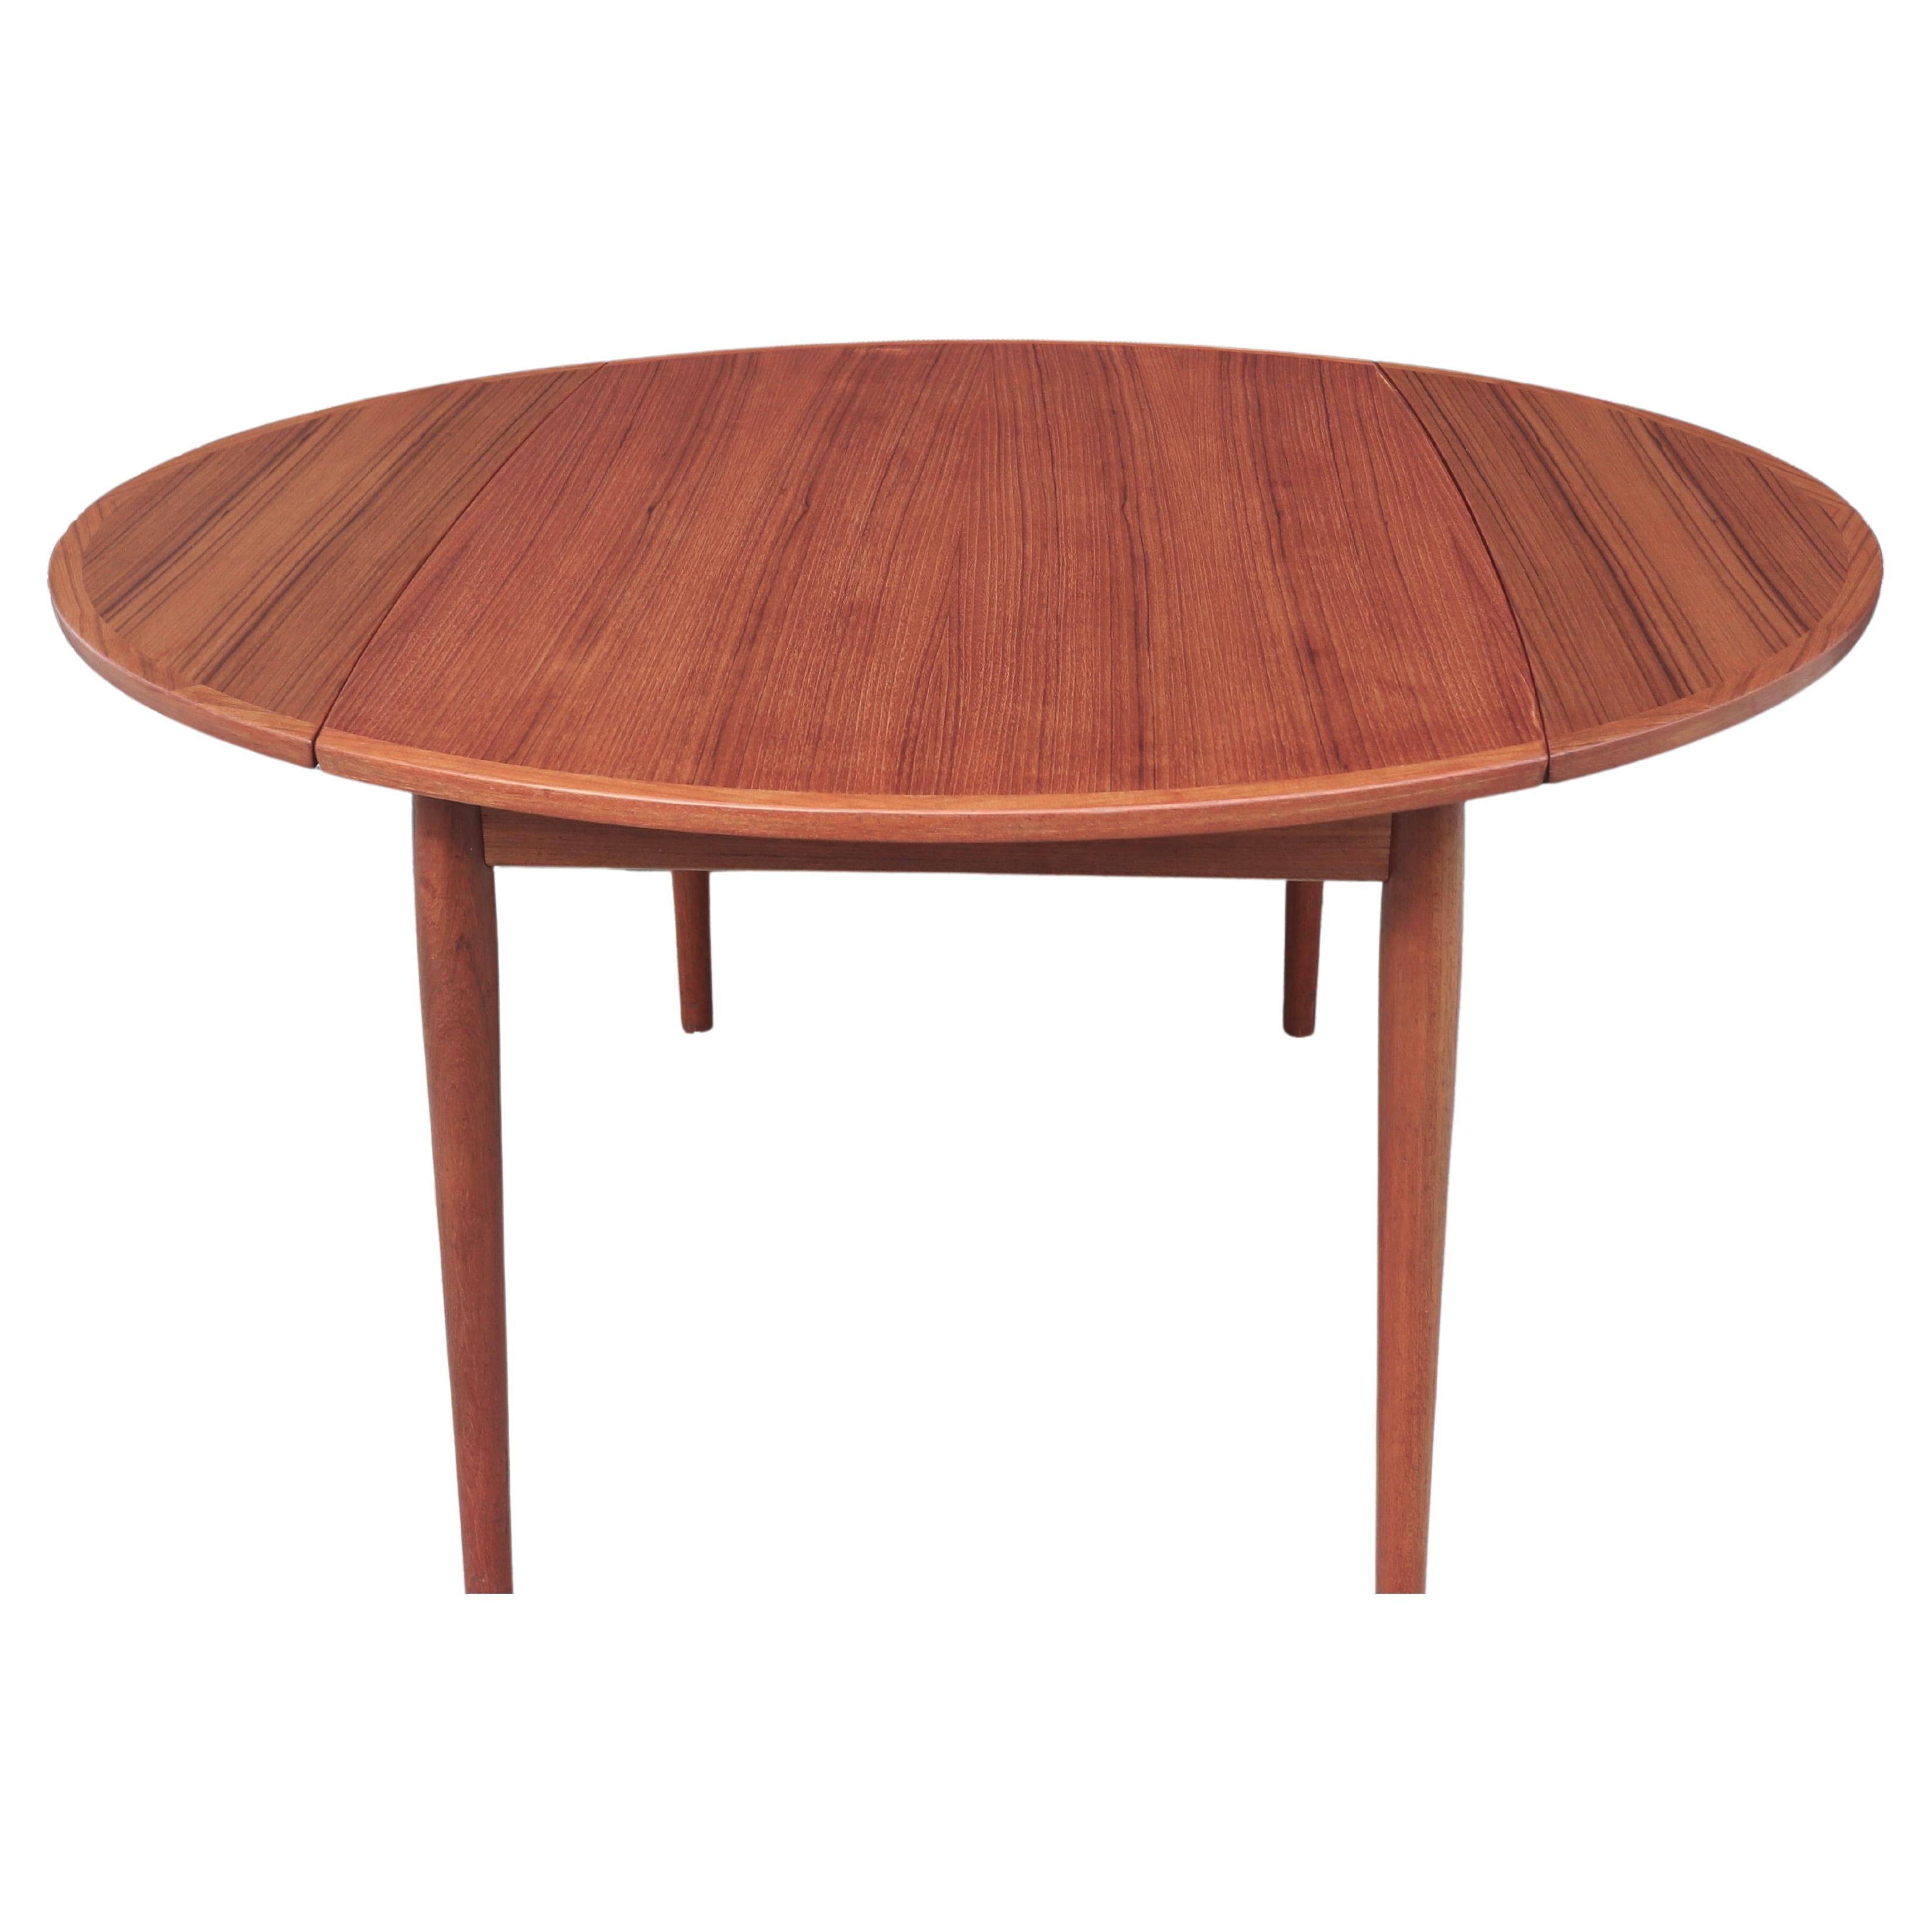 Quality vintage 1960s Teak Danish round extendable dining table 